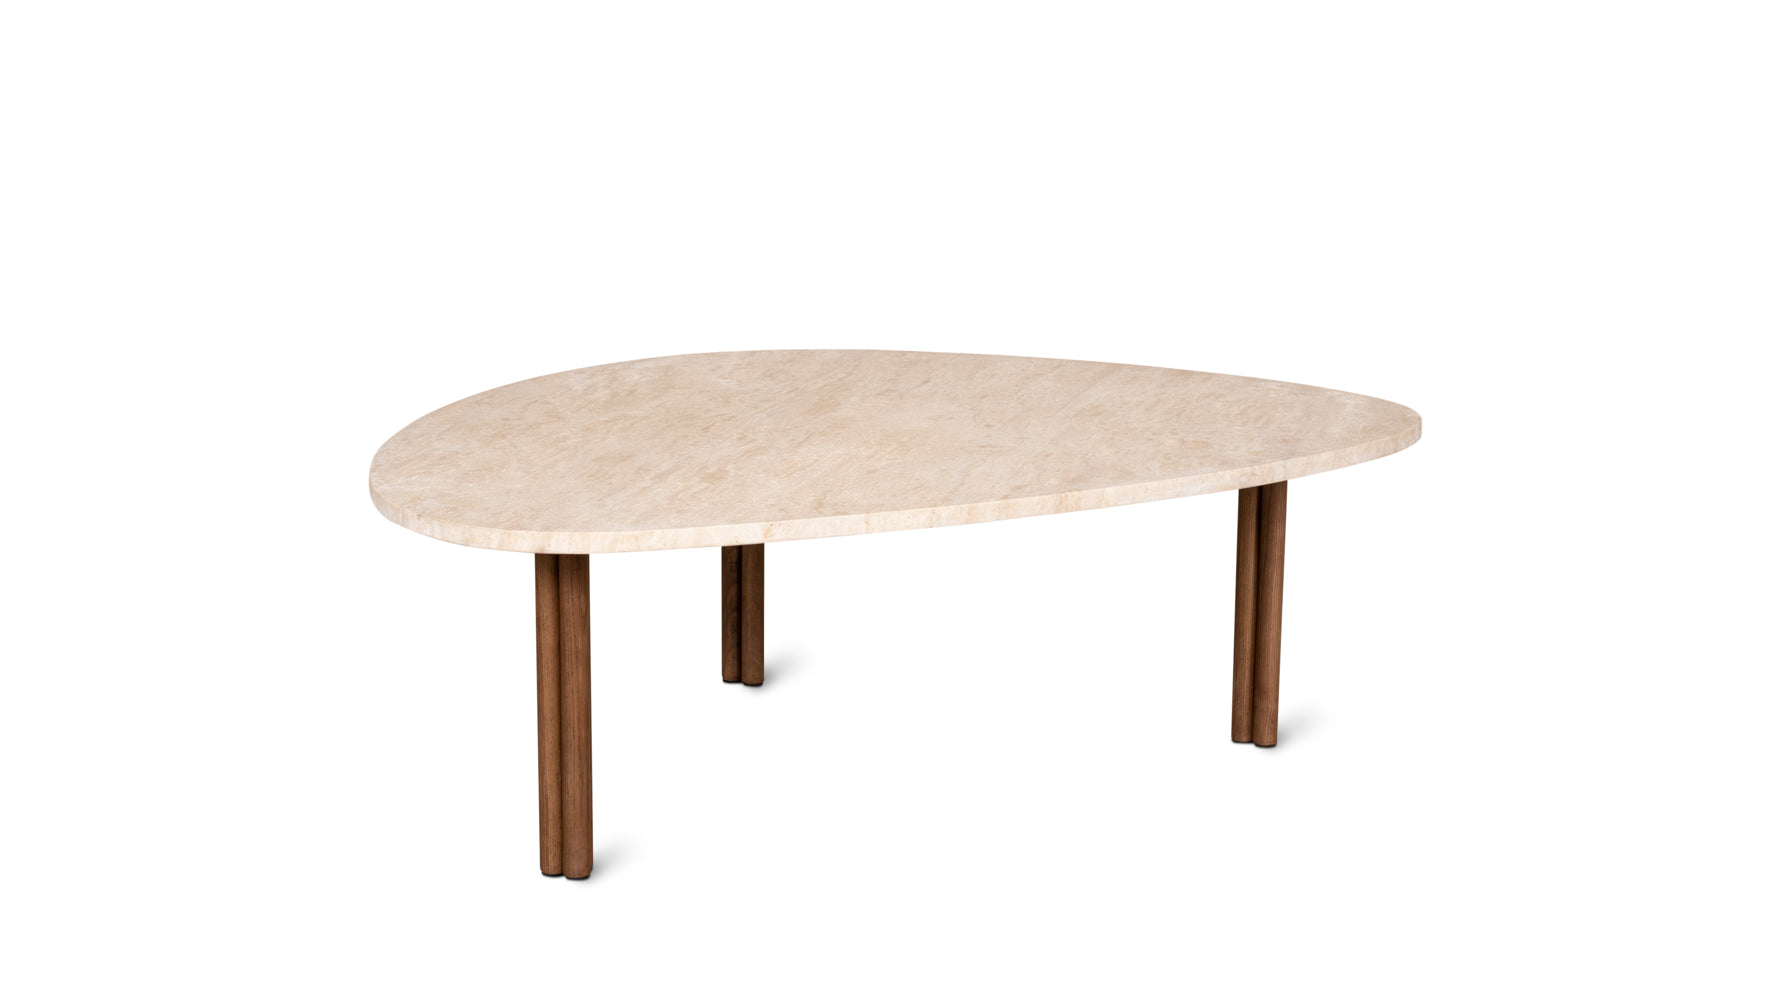 Better Together Coffee Table, Large, Beige Travertine/Walnut Stained Ash - Image 2